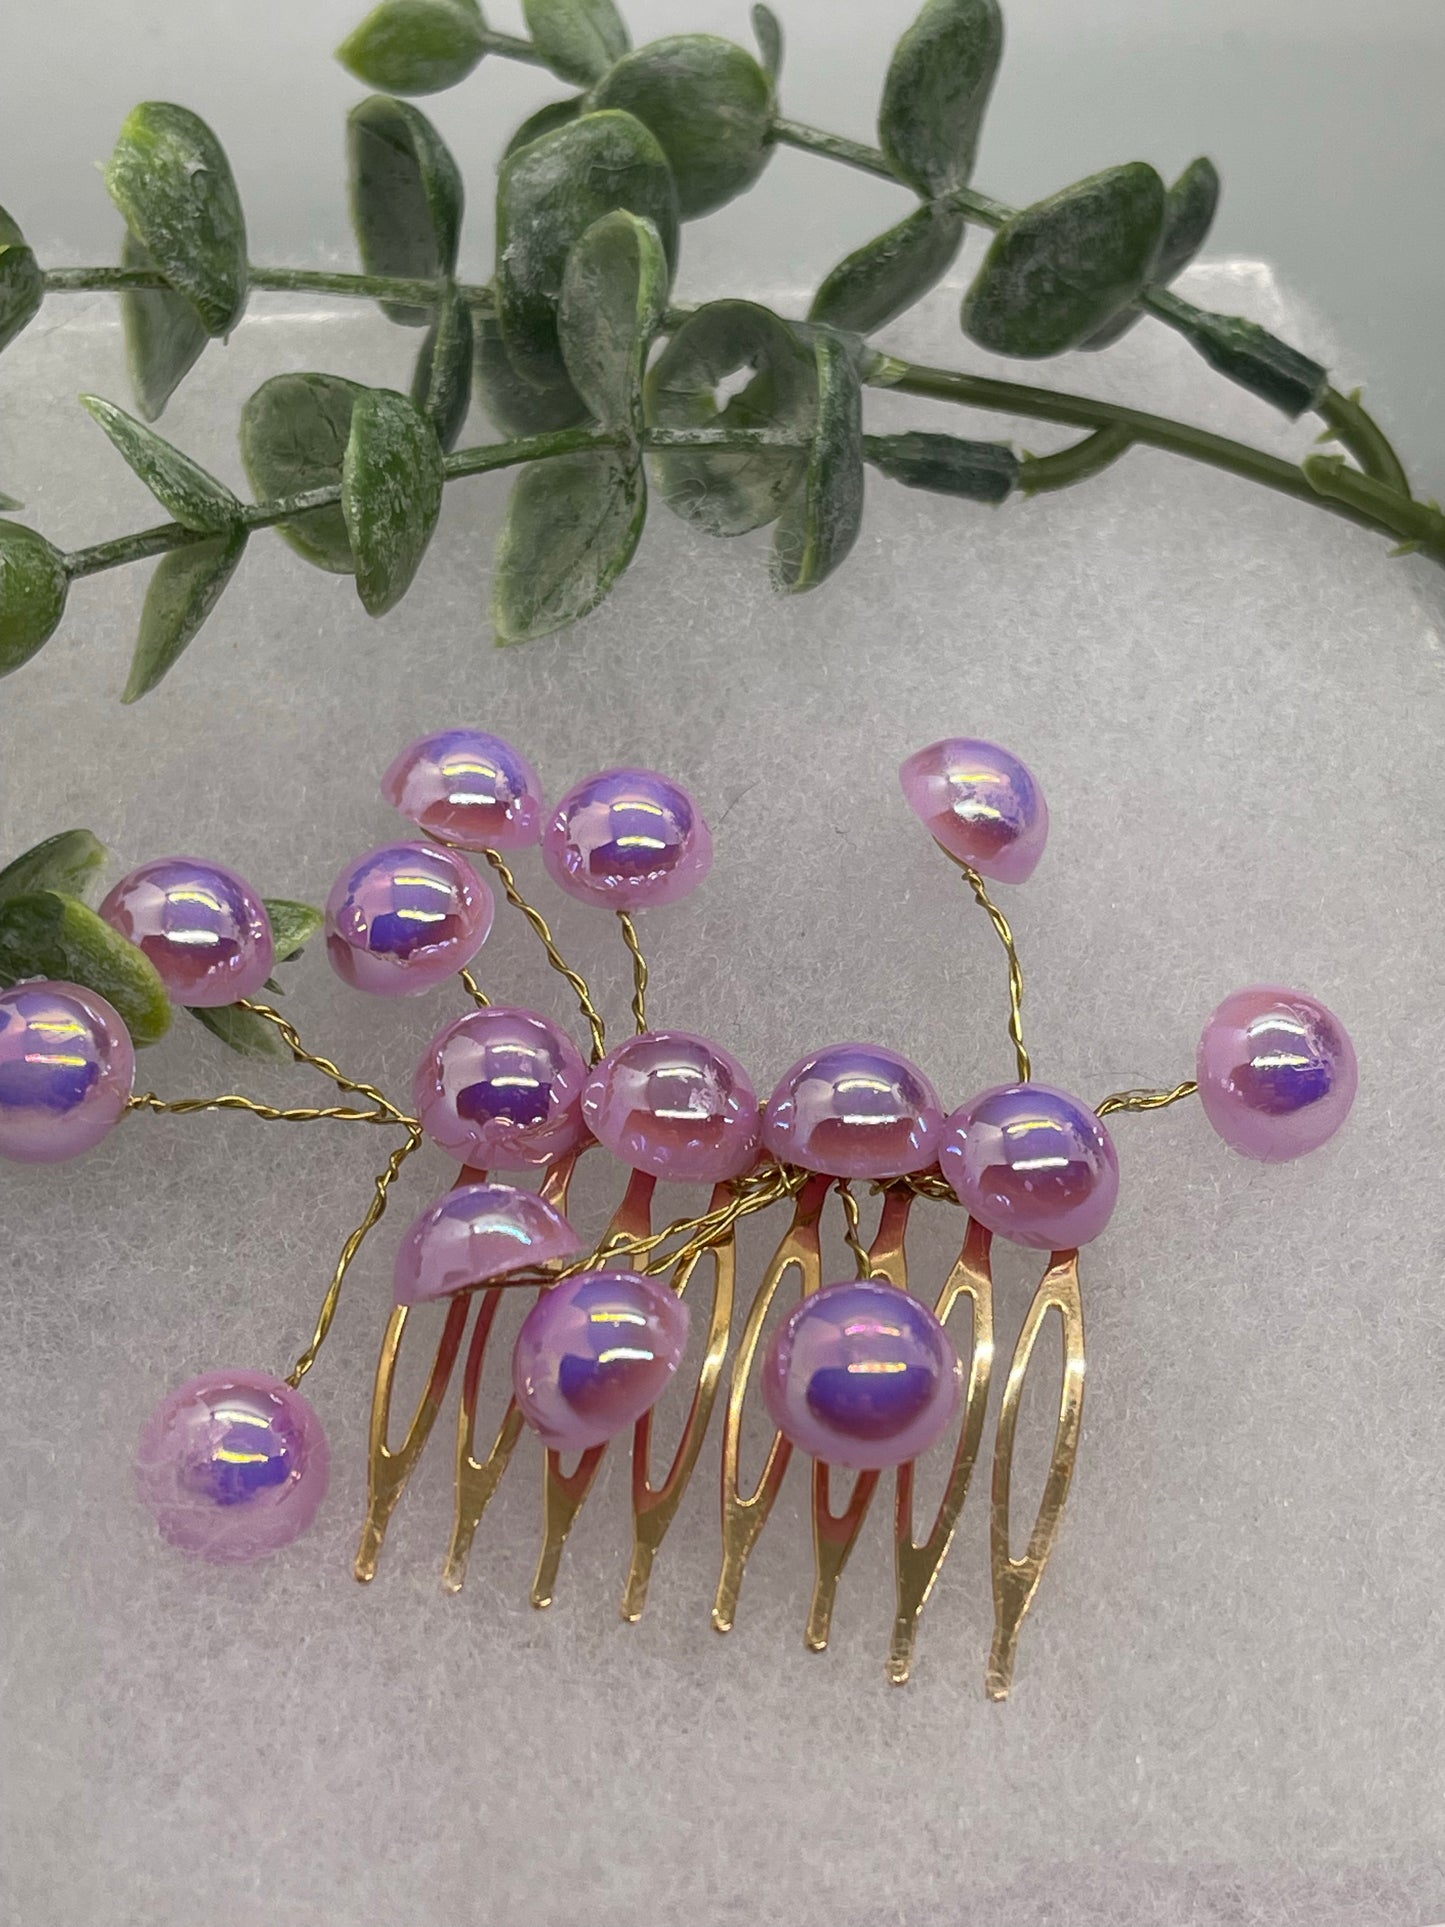 Lavender  faux Pearl 2.0” gold tone bridal side Comb accents vine handmade by hairdazzzel wedding accessory bride princess gifts